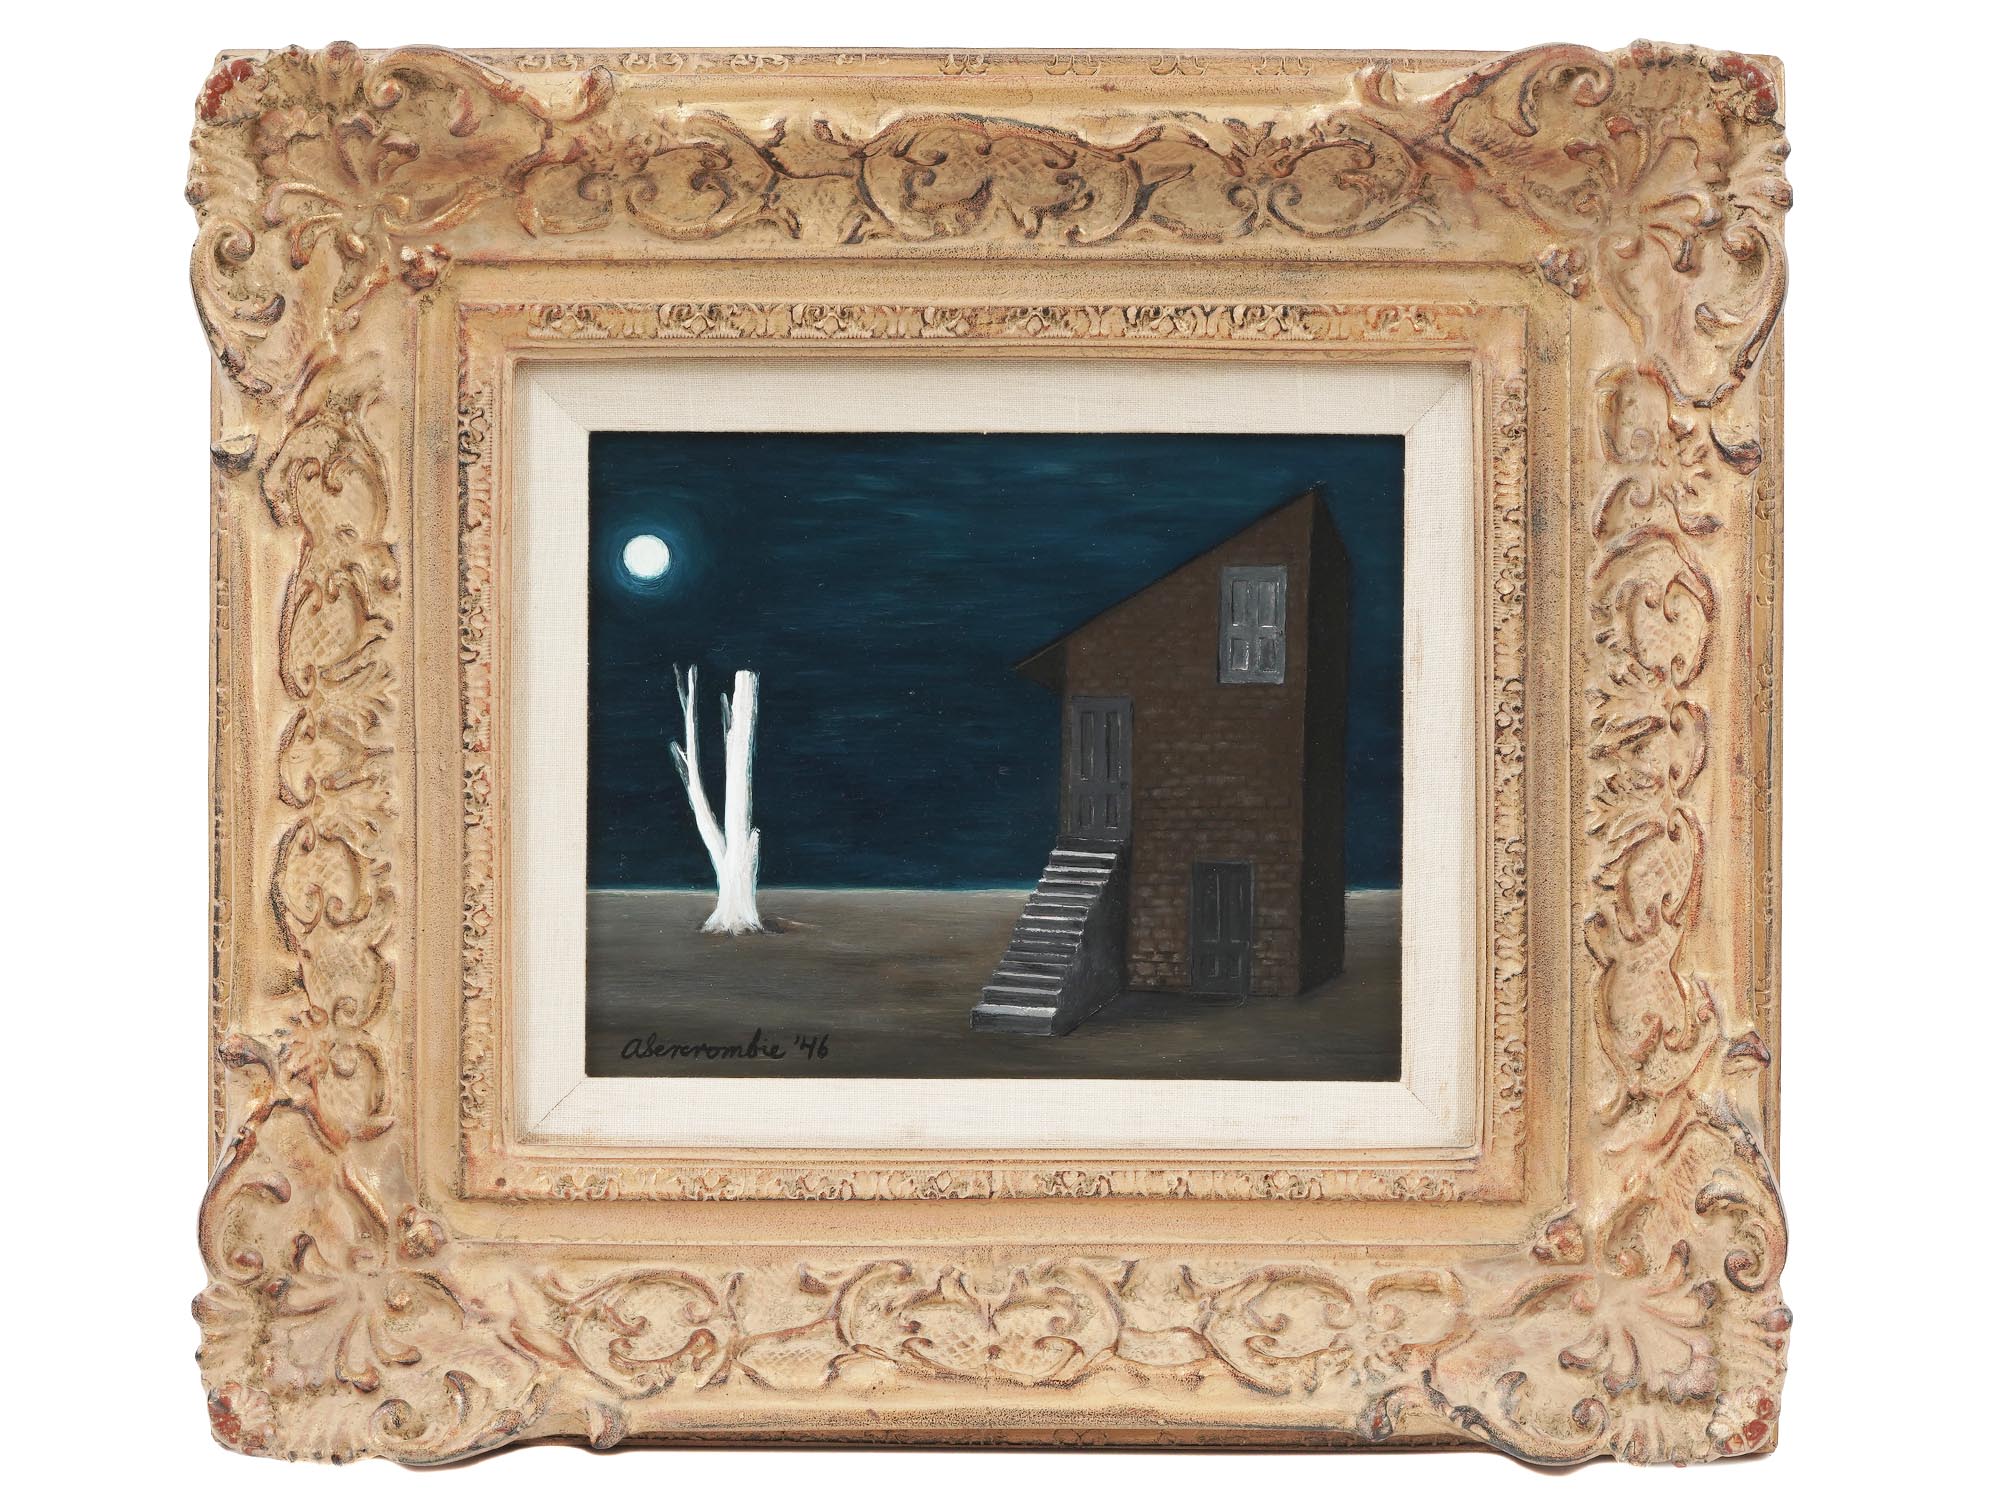 SURREALIST OIL PAINTING BY GERTRUDE ABERCROMBIE PIC-0